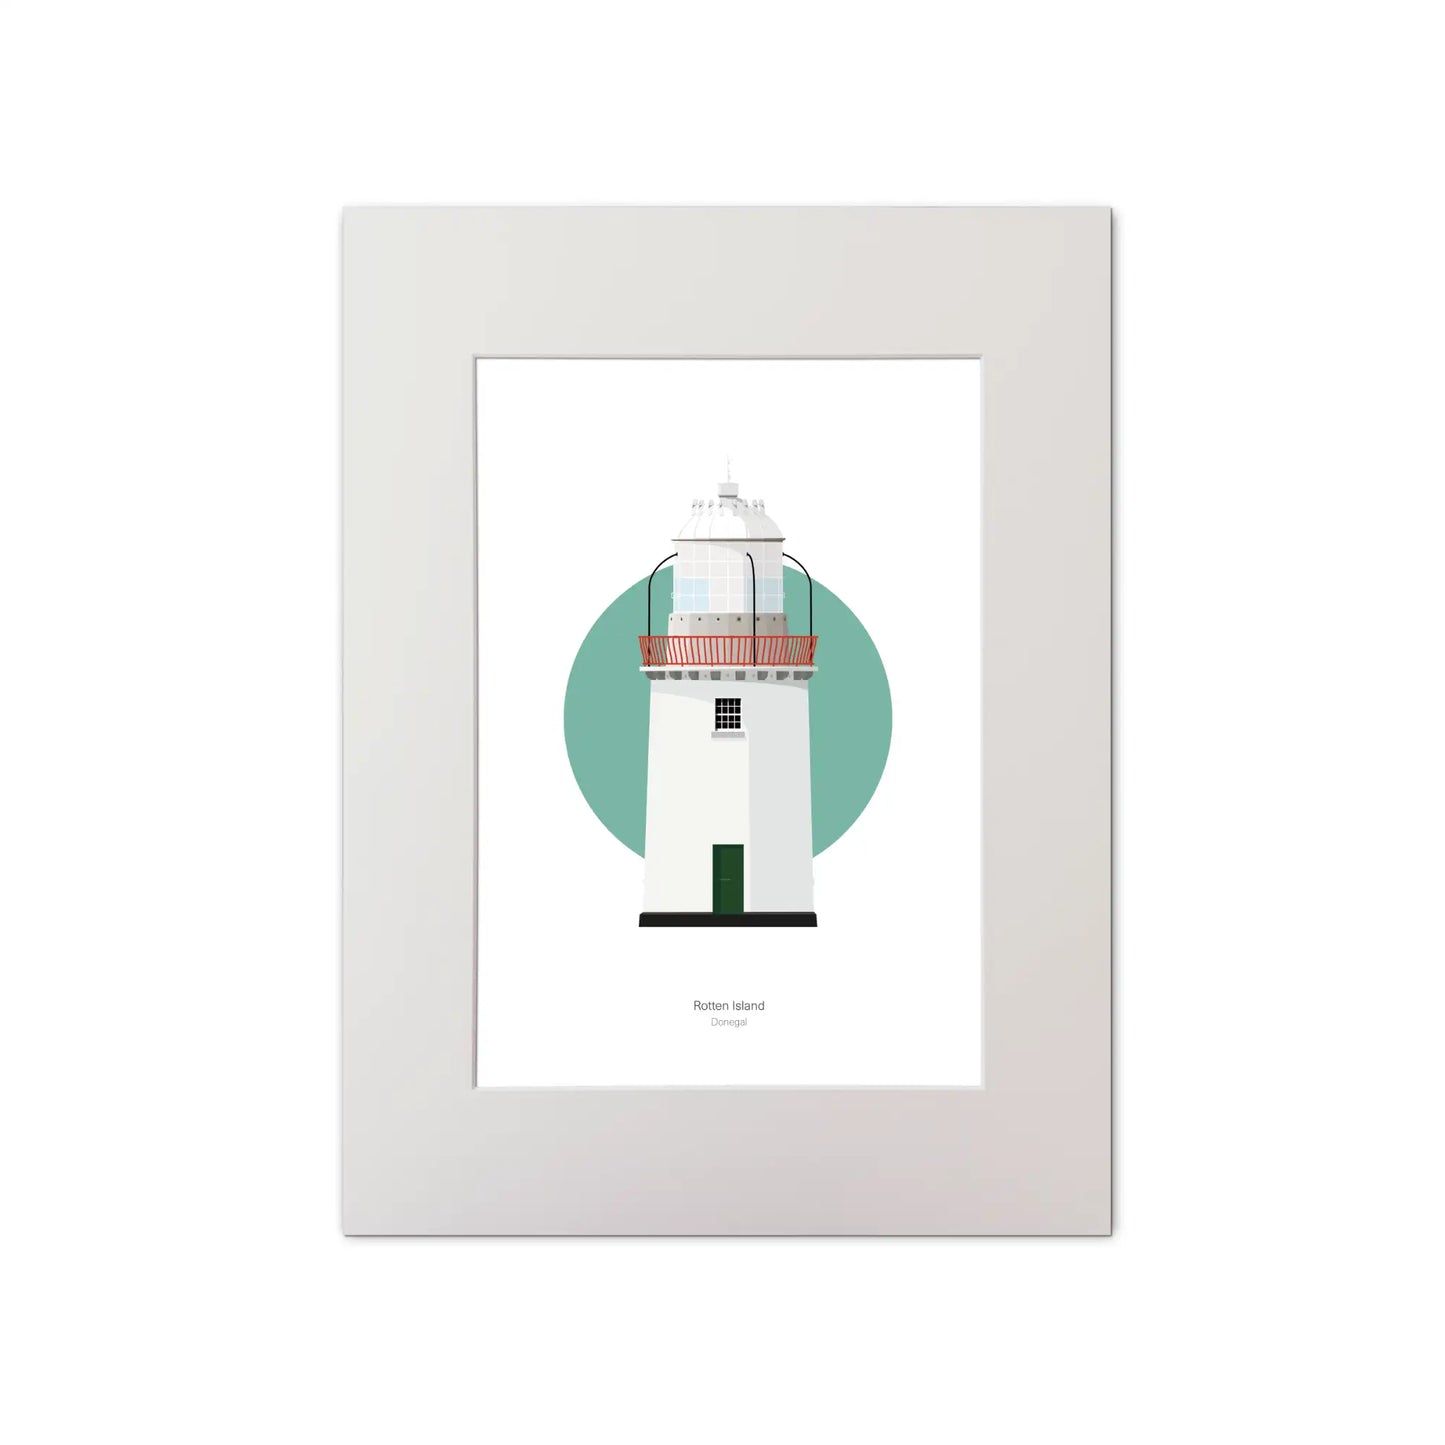 Contemporary graphic illustration of Rotten Island lighthouse on a white background inside light blue square, mounted and measuring 30x40cm.